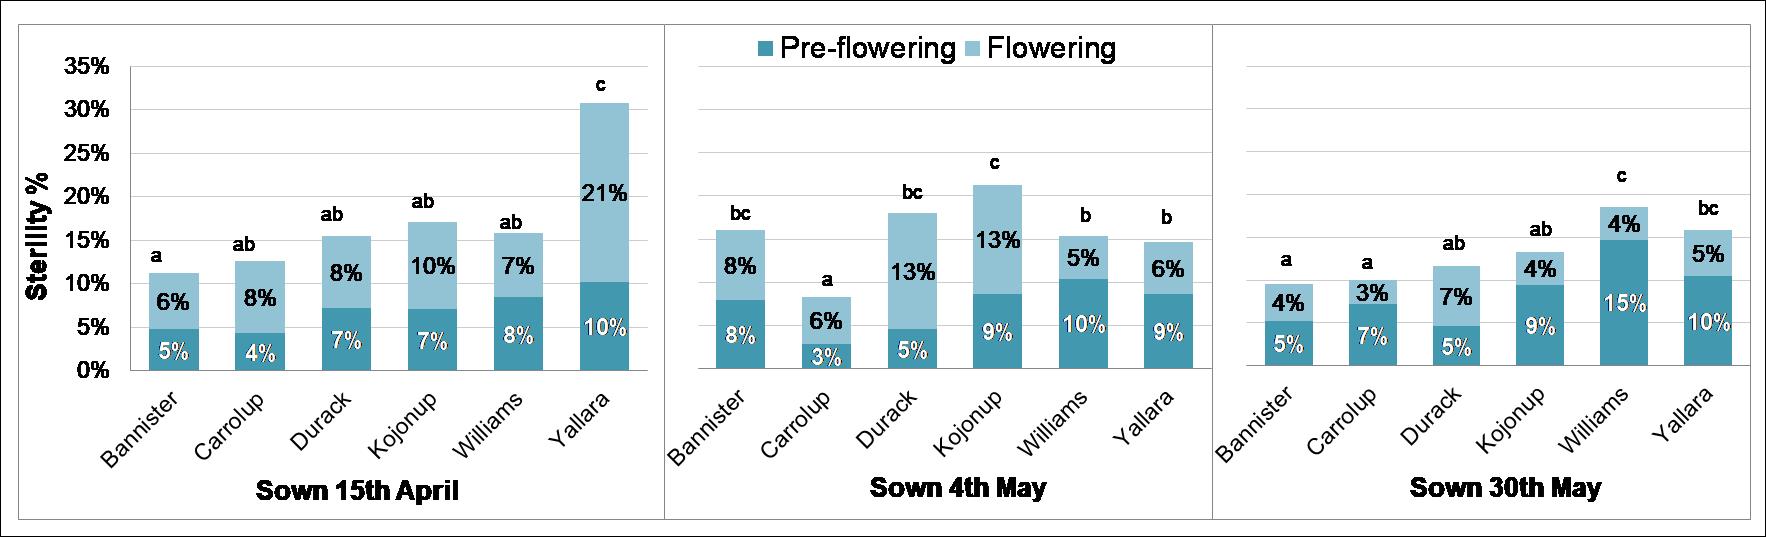 bar graph of percentage sterility pre-flowering and flowering 